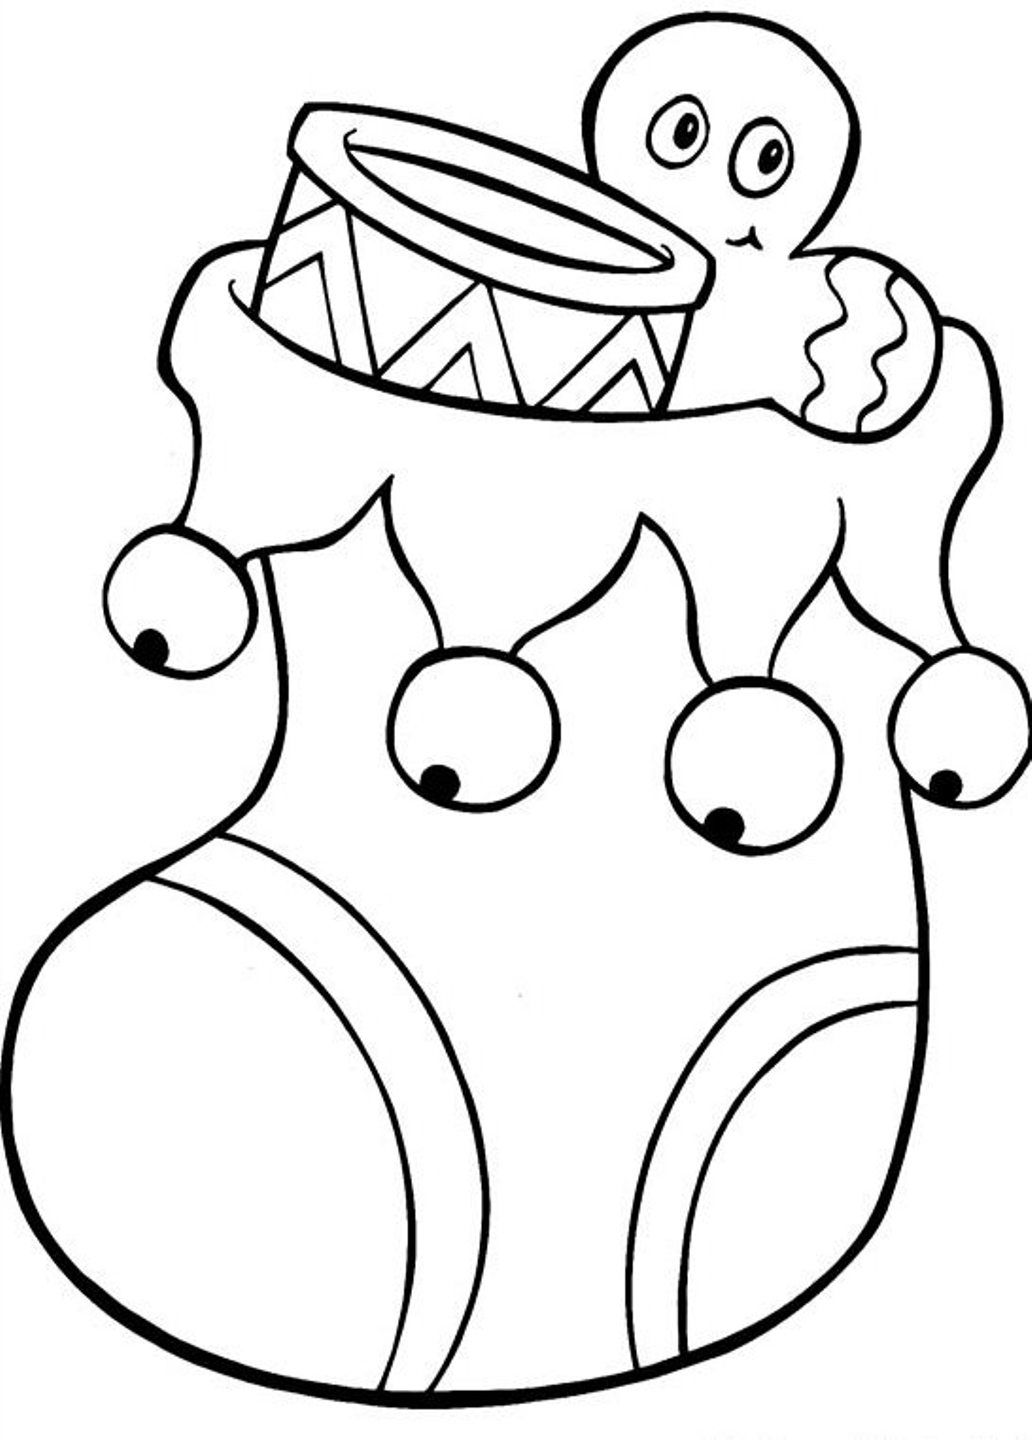 Christmas Stocking Coloring Sheet : Free Coloring Pages Christmas ...